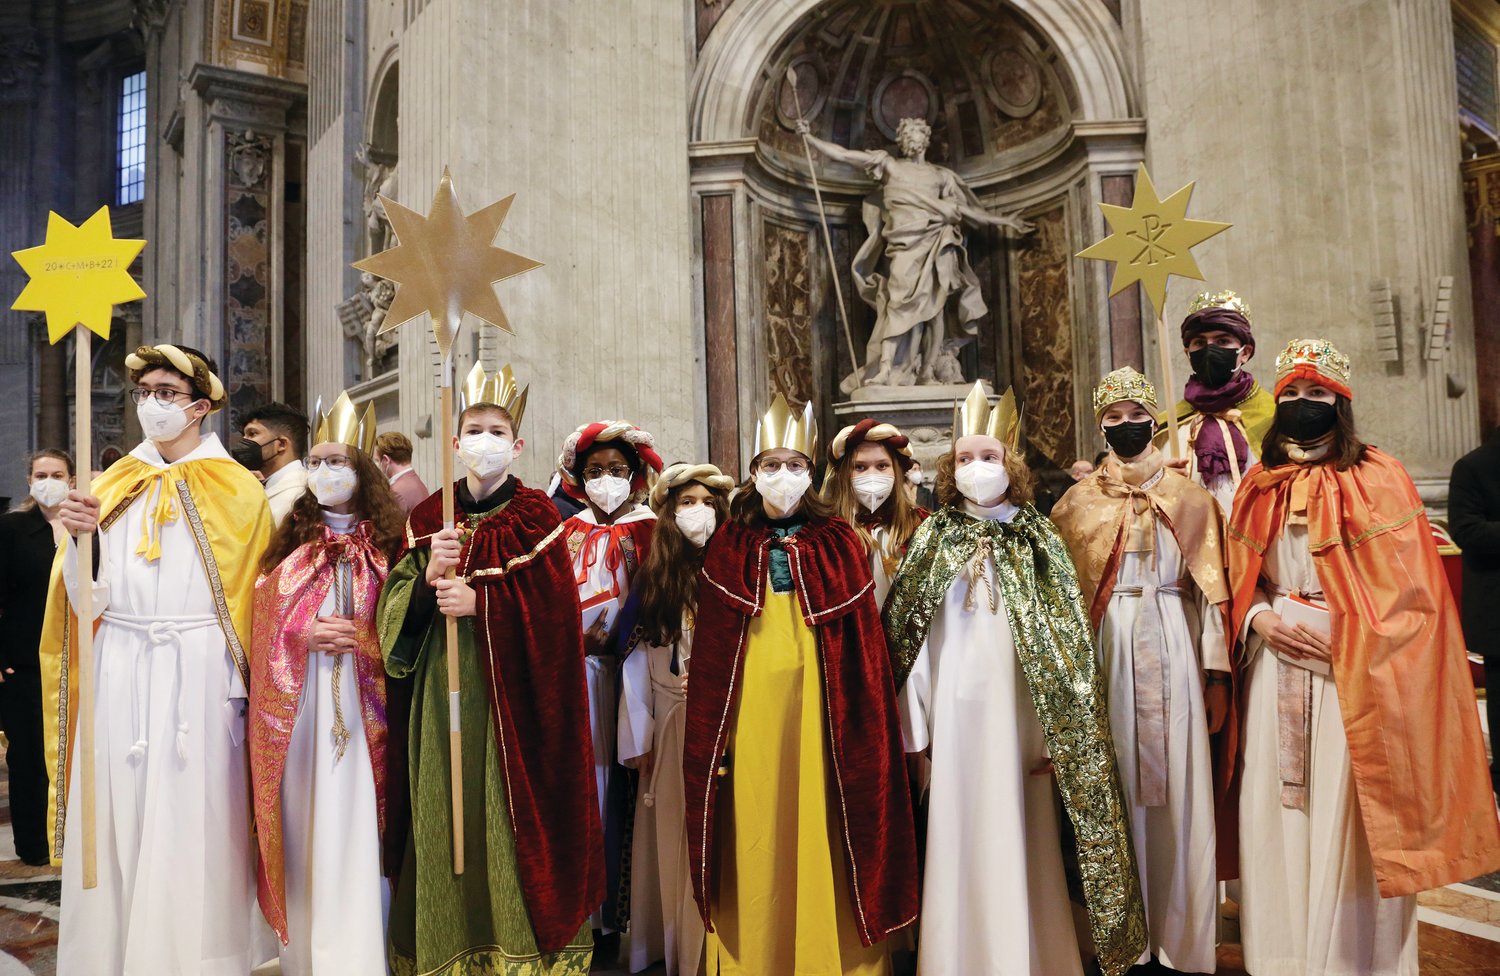 Young people dressed as the Magi are pictured after attending Pope Francis' celebration of Mass on the feast of Mary, Mother of God, at the Vatican Jan. 1, 2022. German, Italian and Swiss young people, called "sternsingers," carol and raise money for charity between Christmas and Epiphany each year.